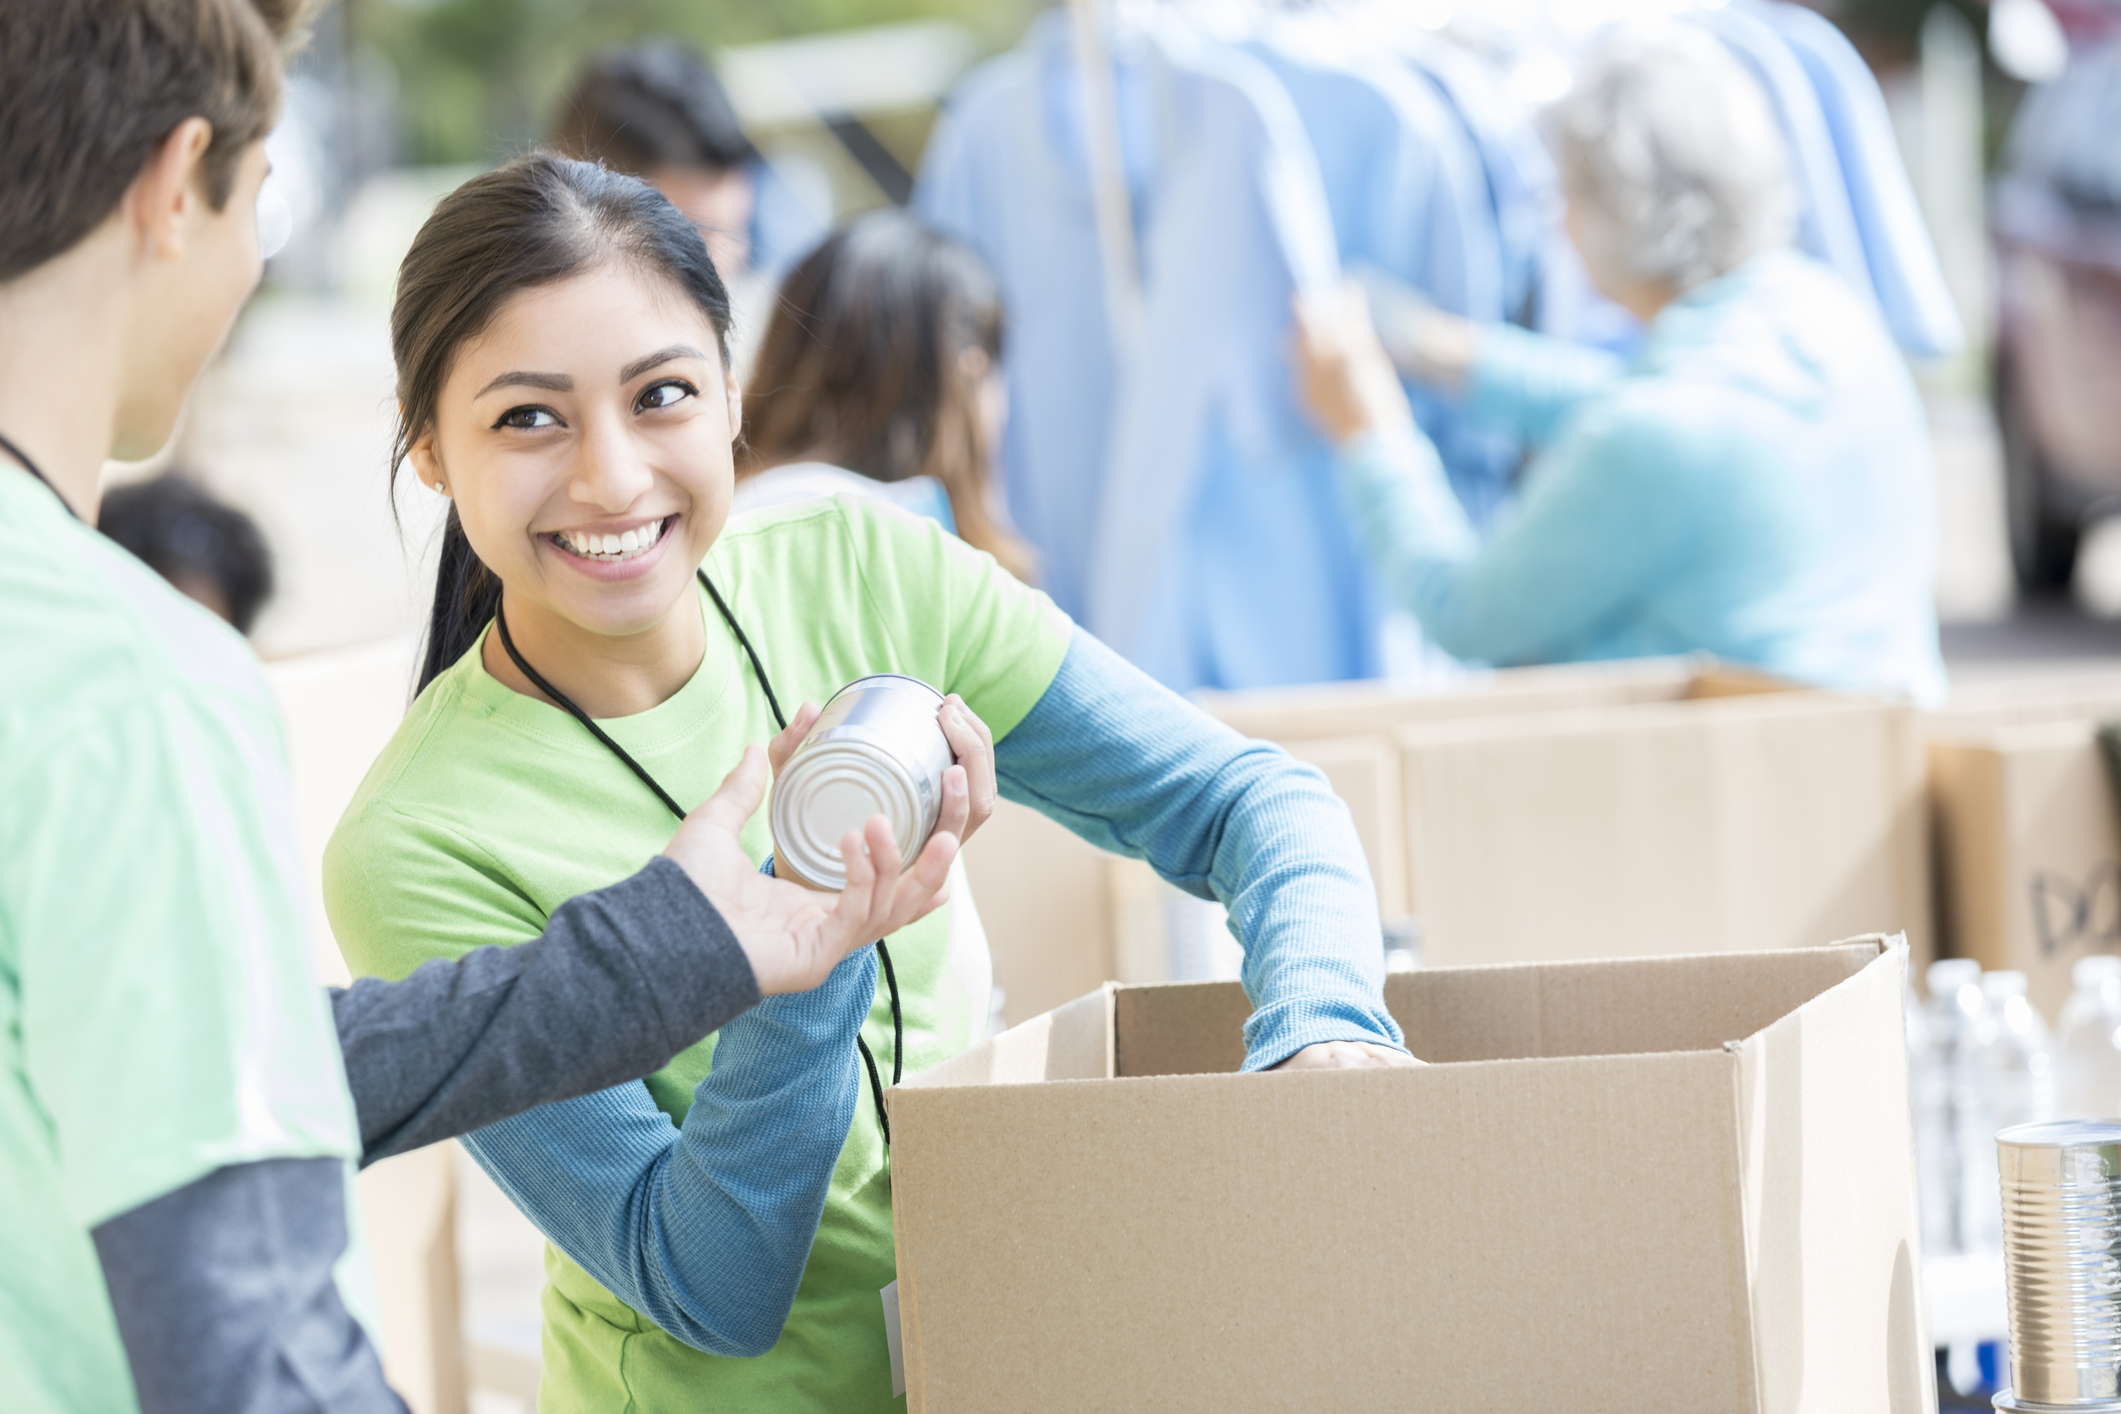 A woman in a green shirt smiles as she hands a canned good to a person. They are outdoors, and there are cardboard boxes and people in the background. The scene appears to be a volunteer event or food drive.